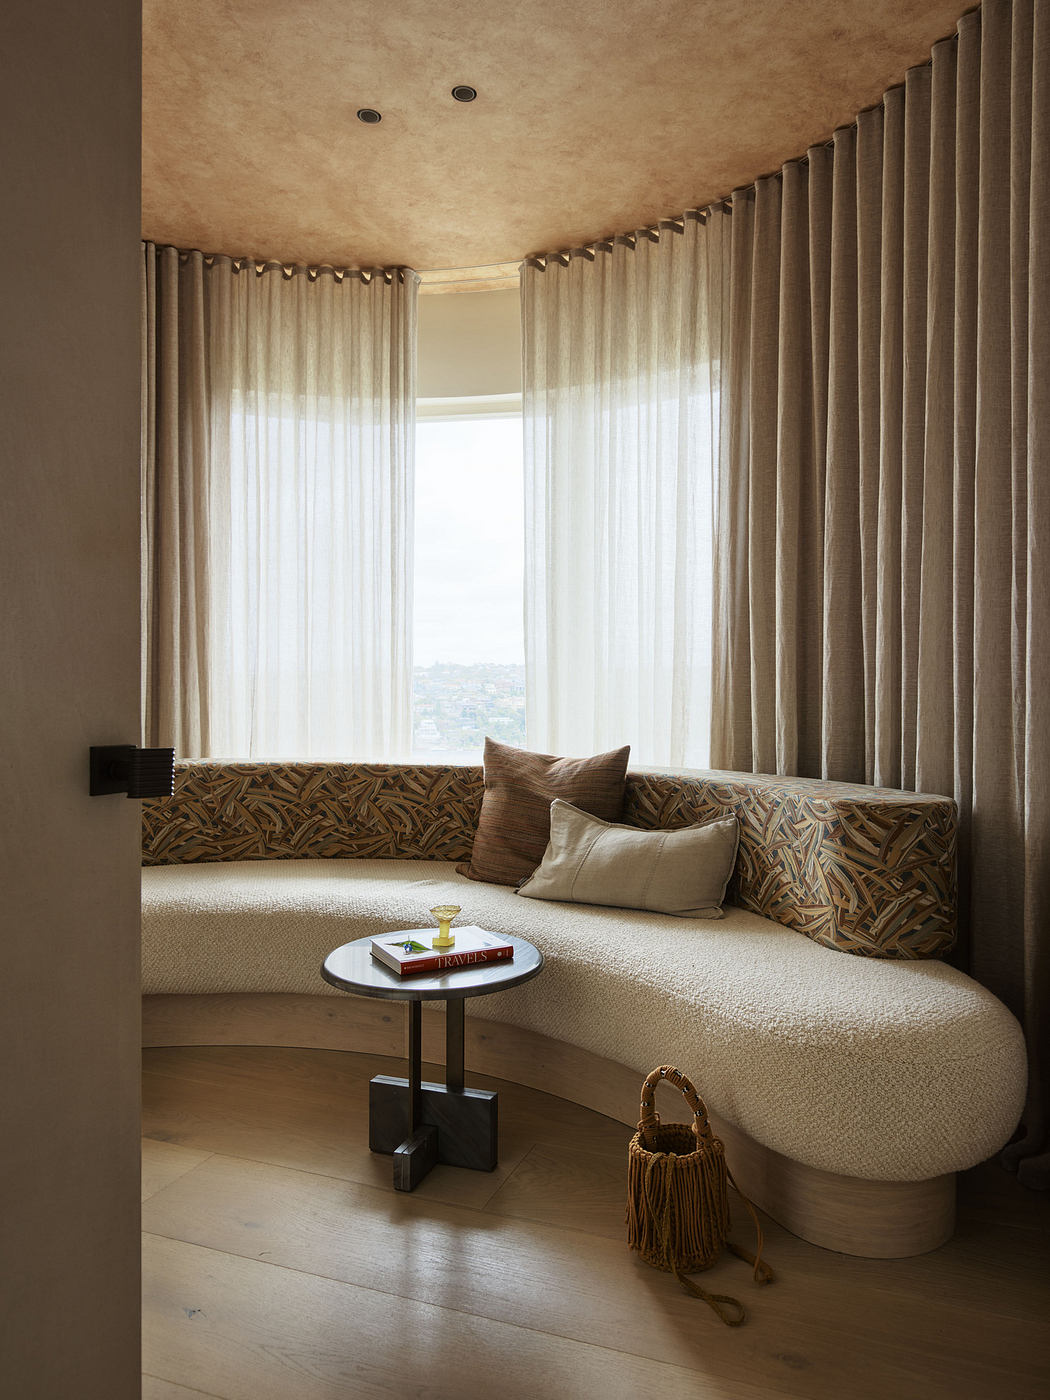 Elegant curved seating nook with patterned cushions, sheer curtains, and a